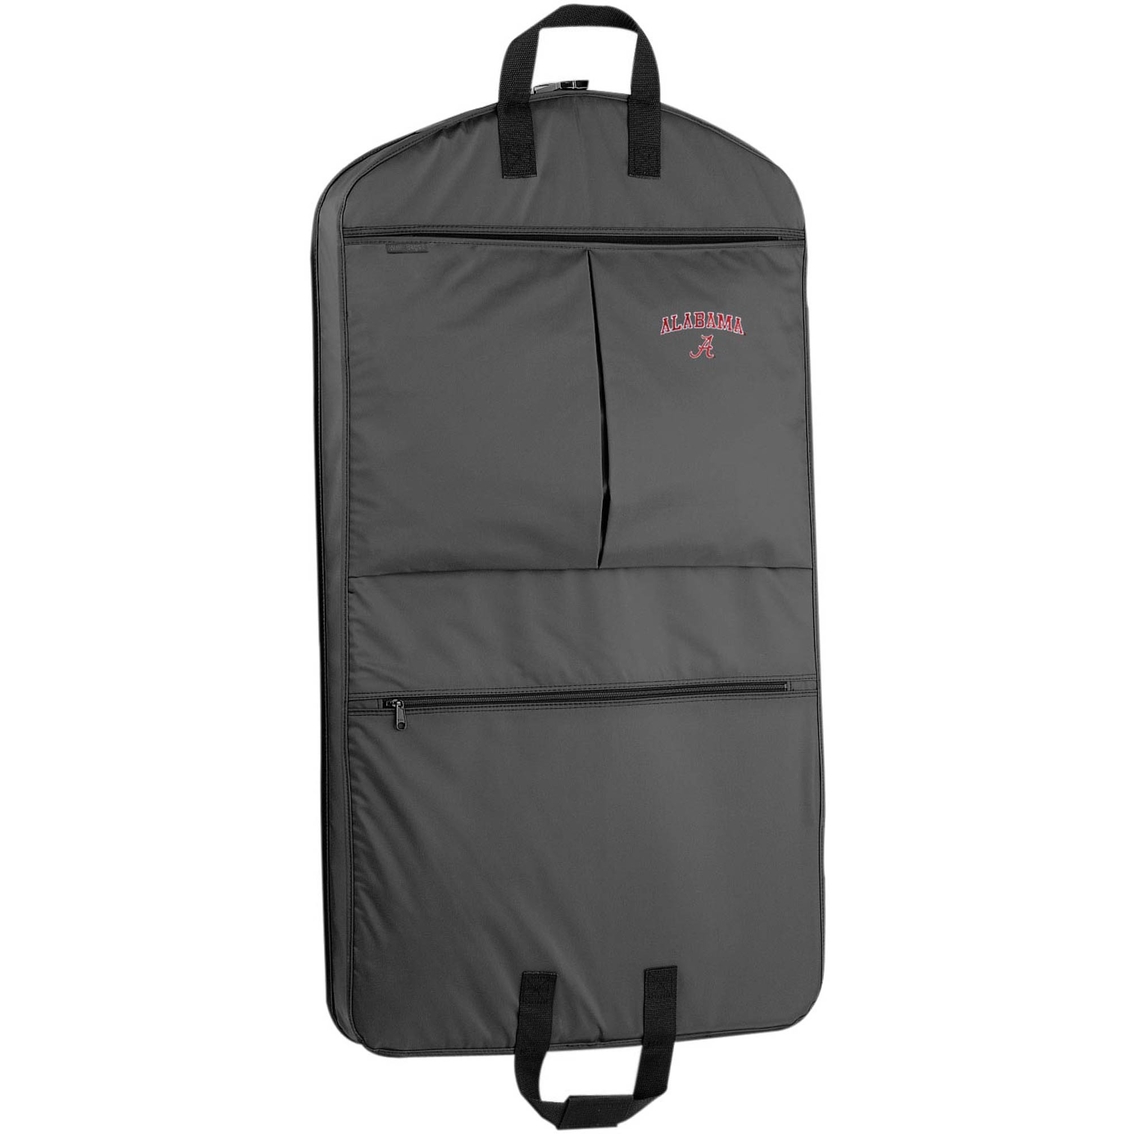 WallyBags NCAA Alabama Crimson Tide 40 in. Suit Length Garment Bag with Pockets - Image 2 of 2